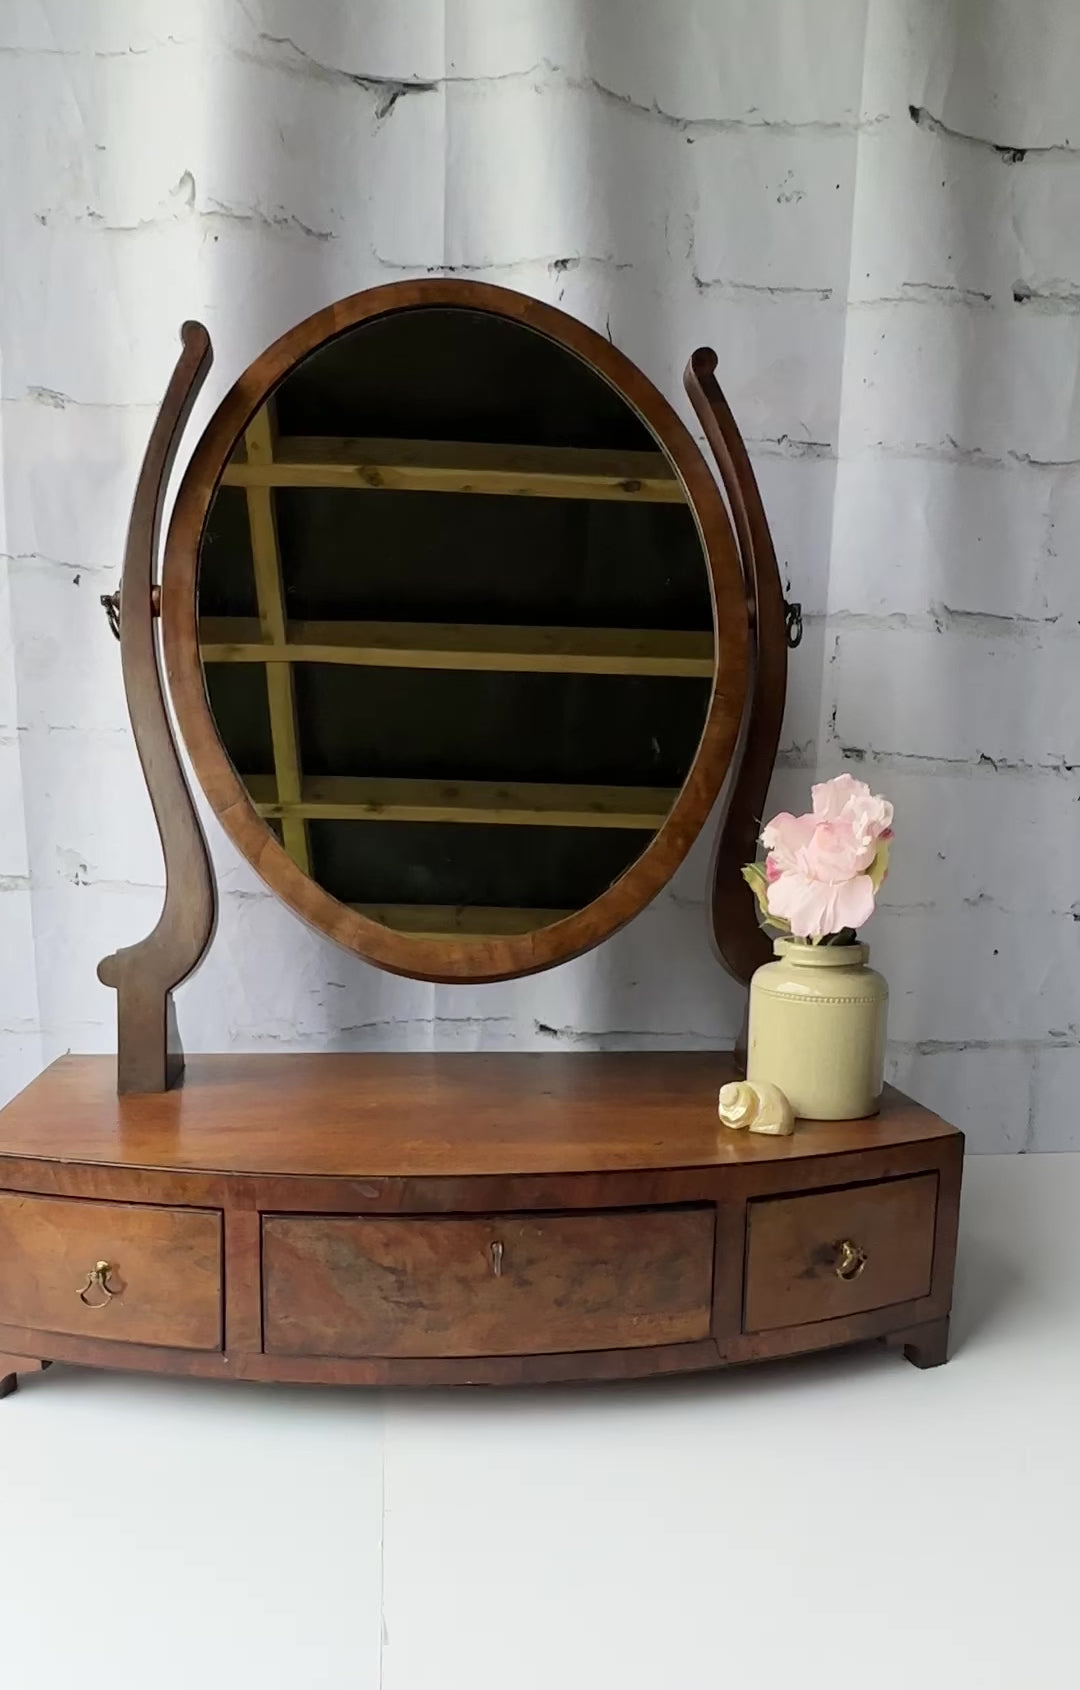 Antique Mahogany Dressing Table Mirror, Toilet Mirror, Wooden Table Top Mirror On Stand, With Drawers, English Country Decor, Cottagecore Decor